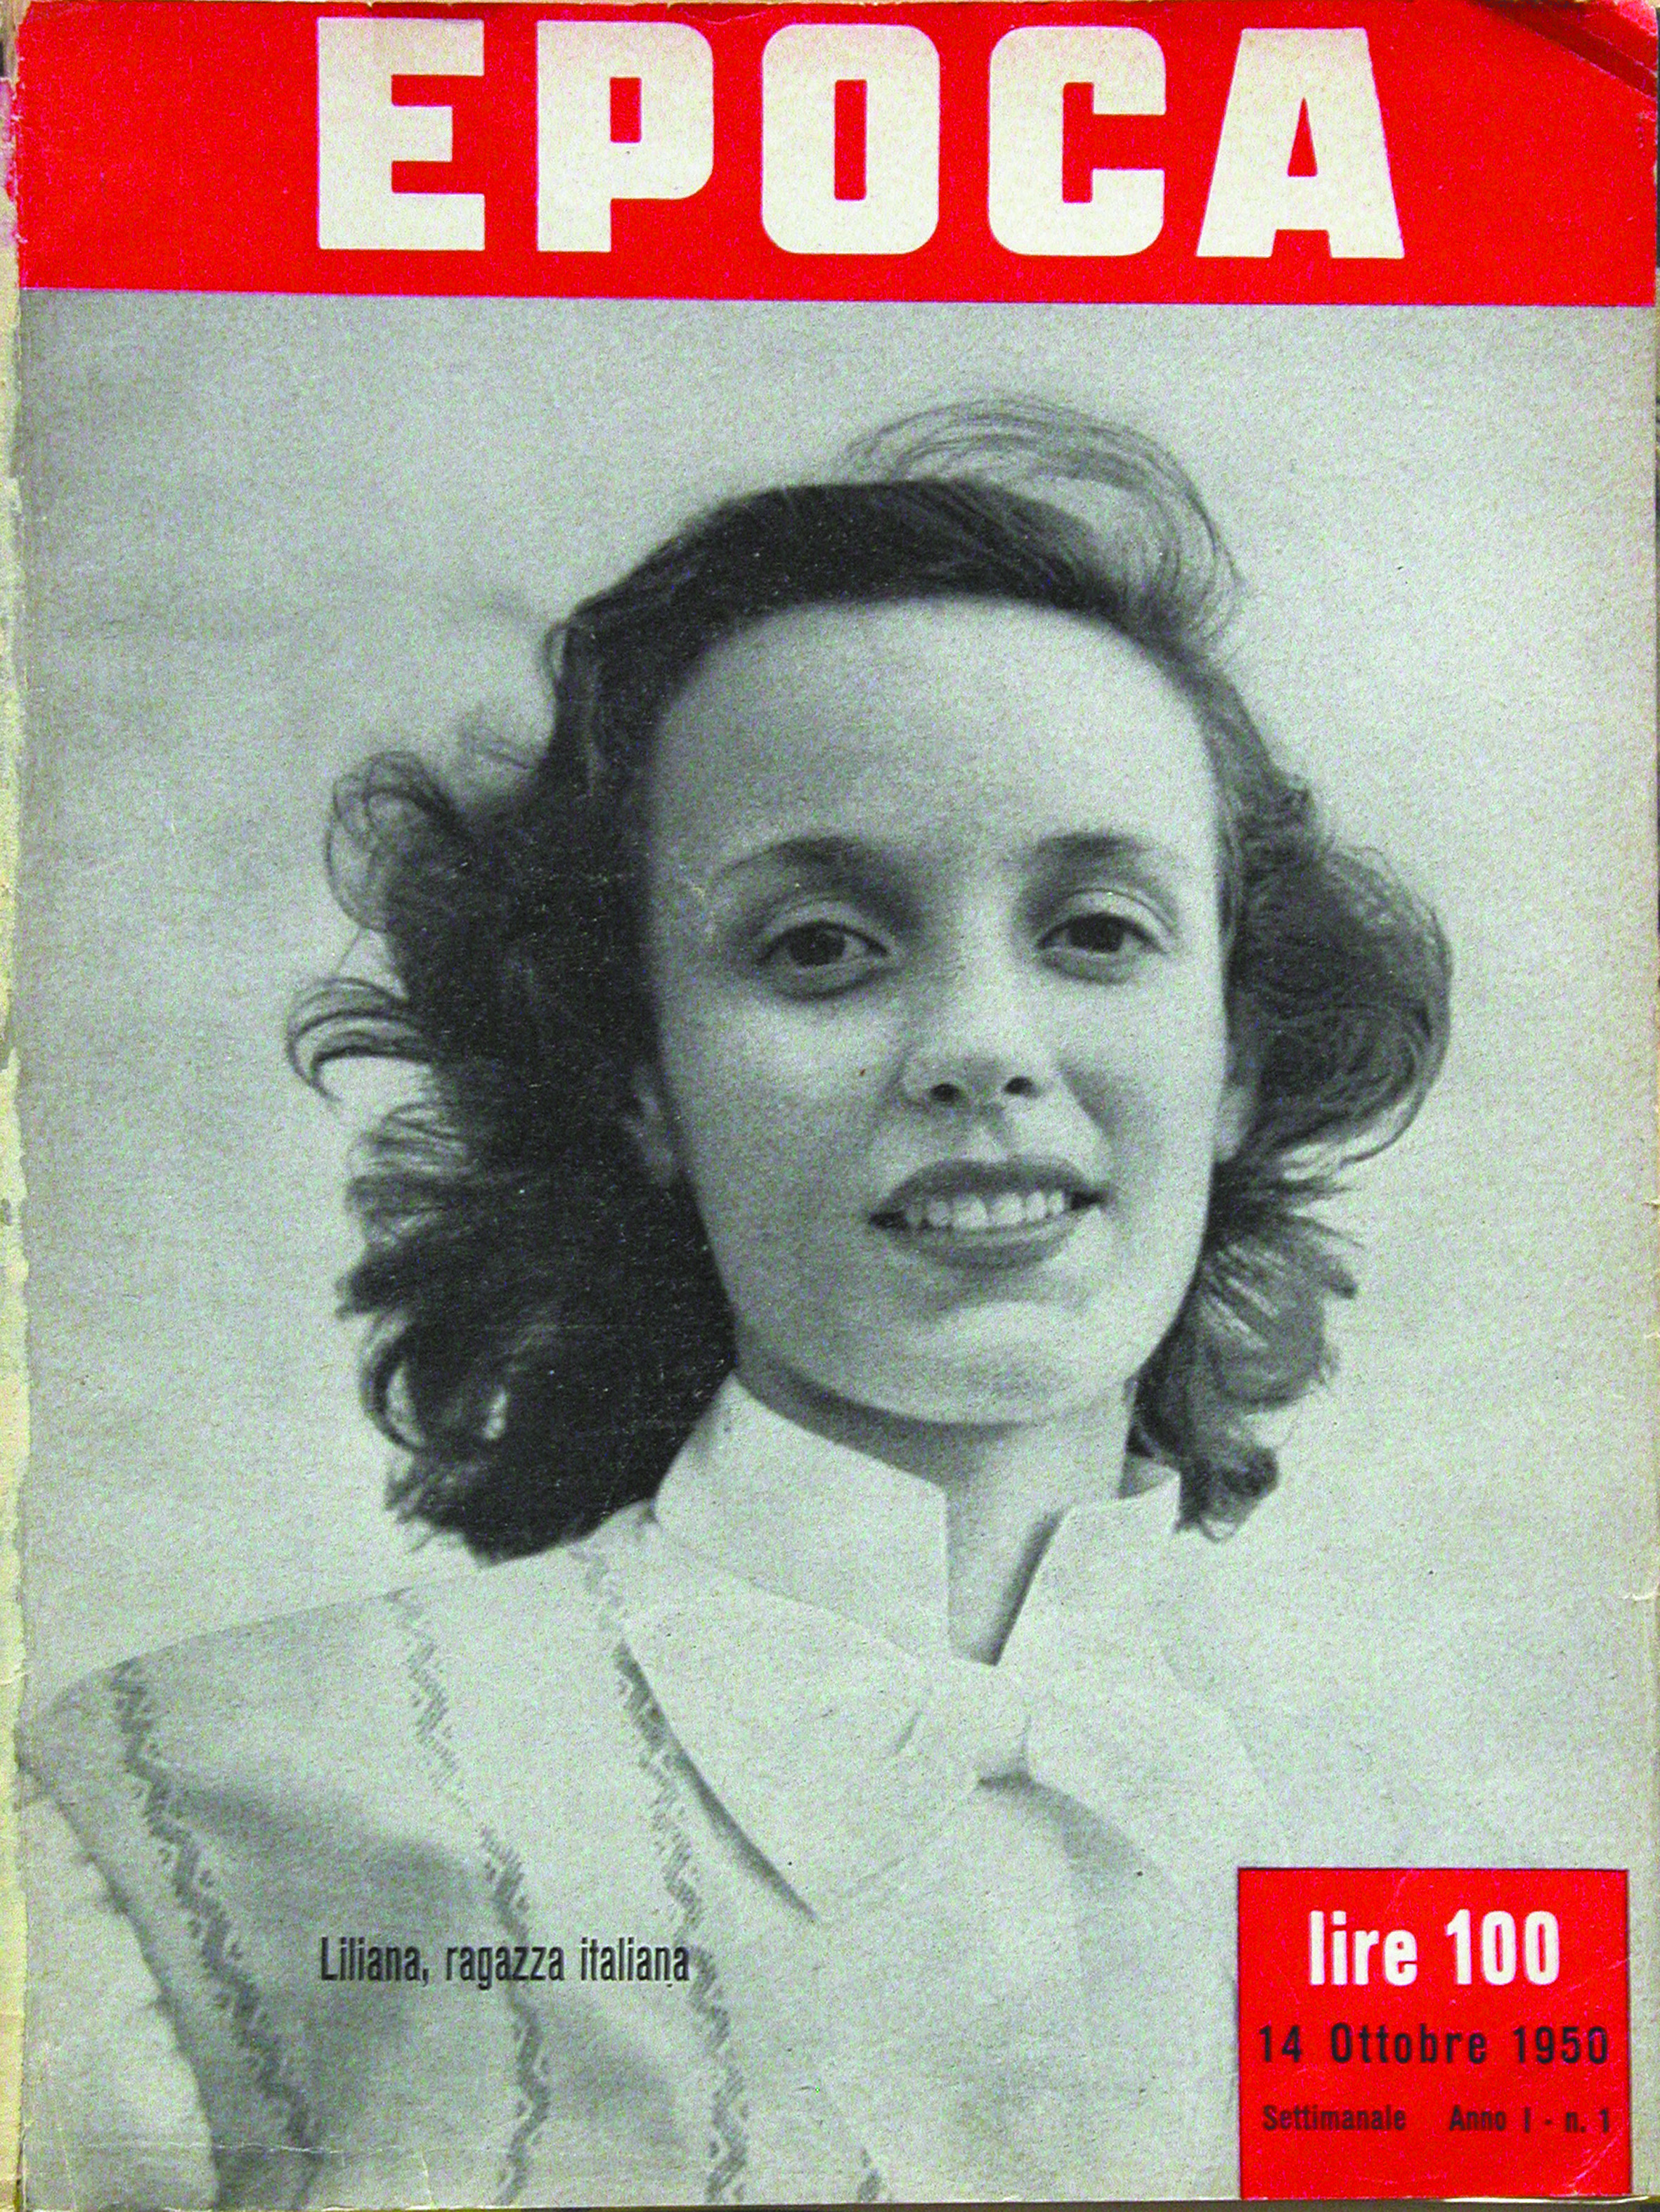 First issue of the magazine Epoca (October 1950)